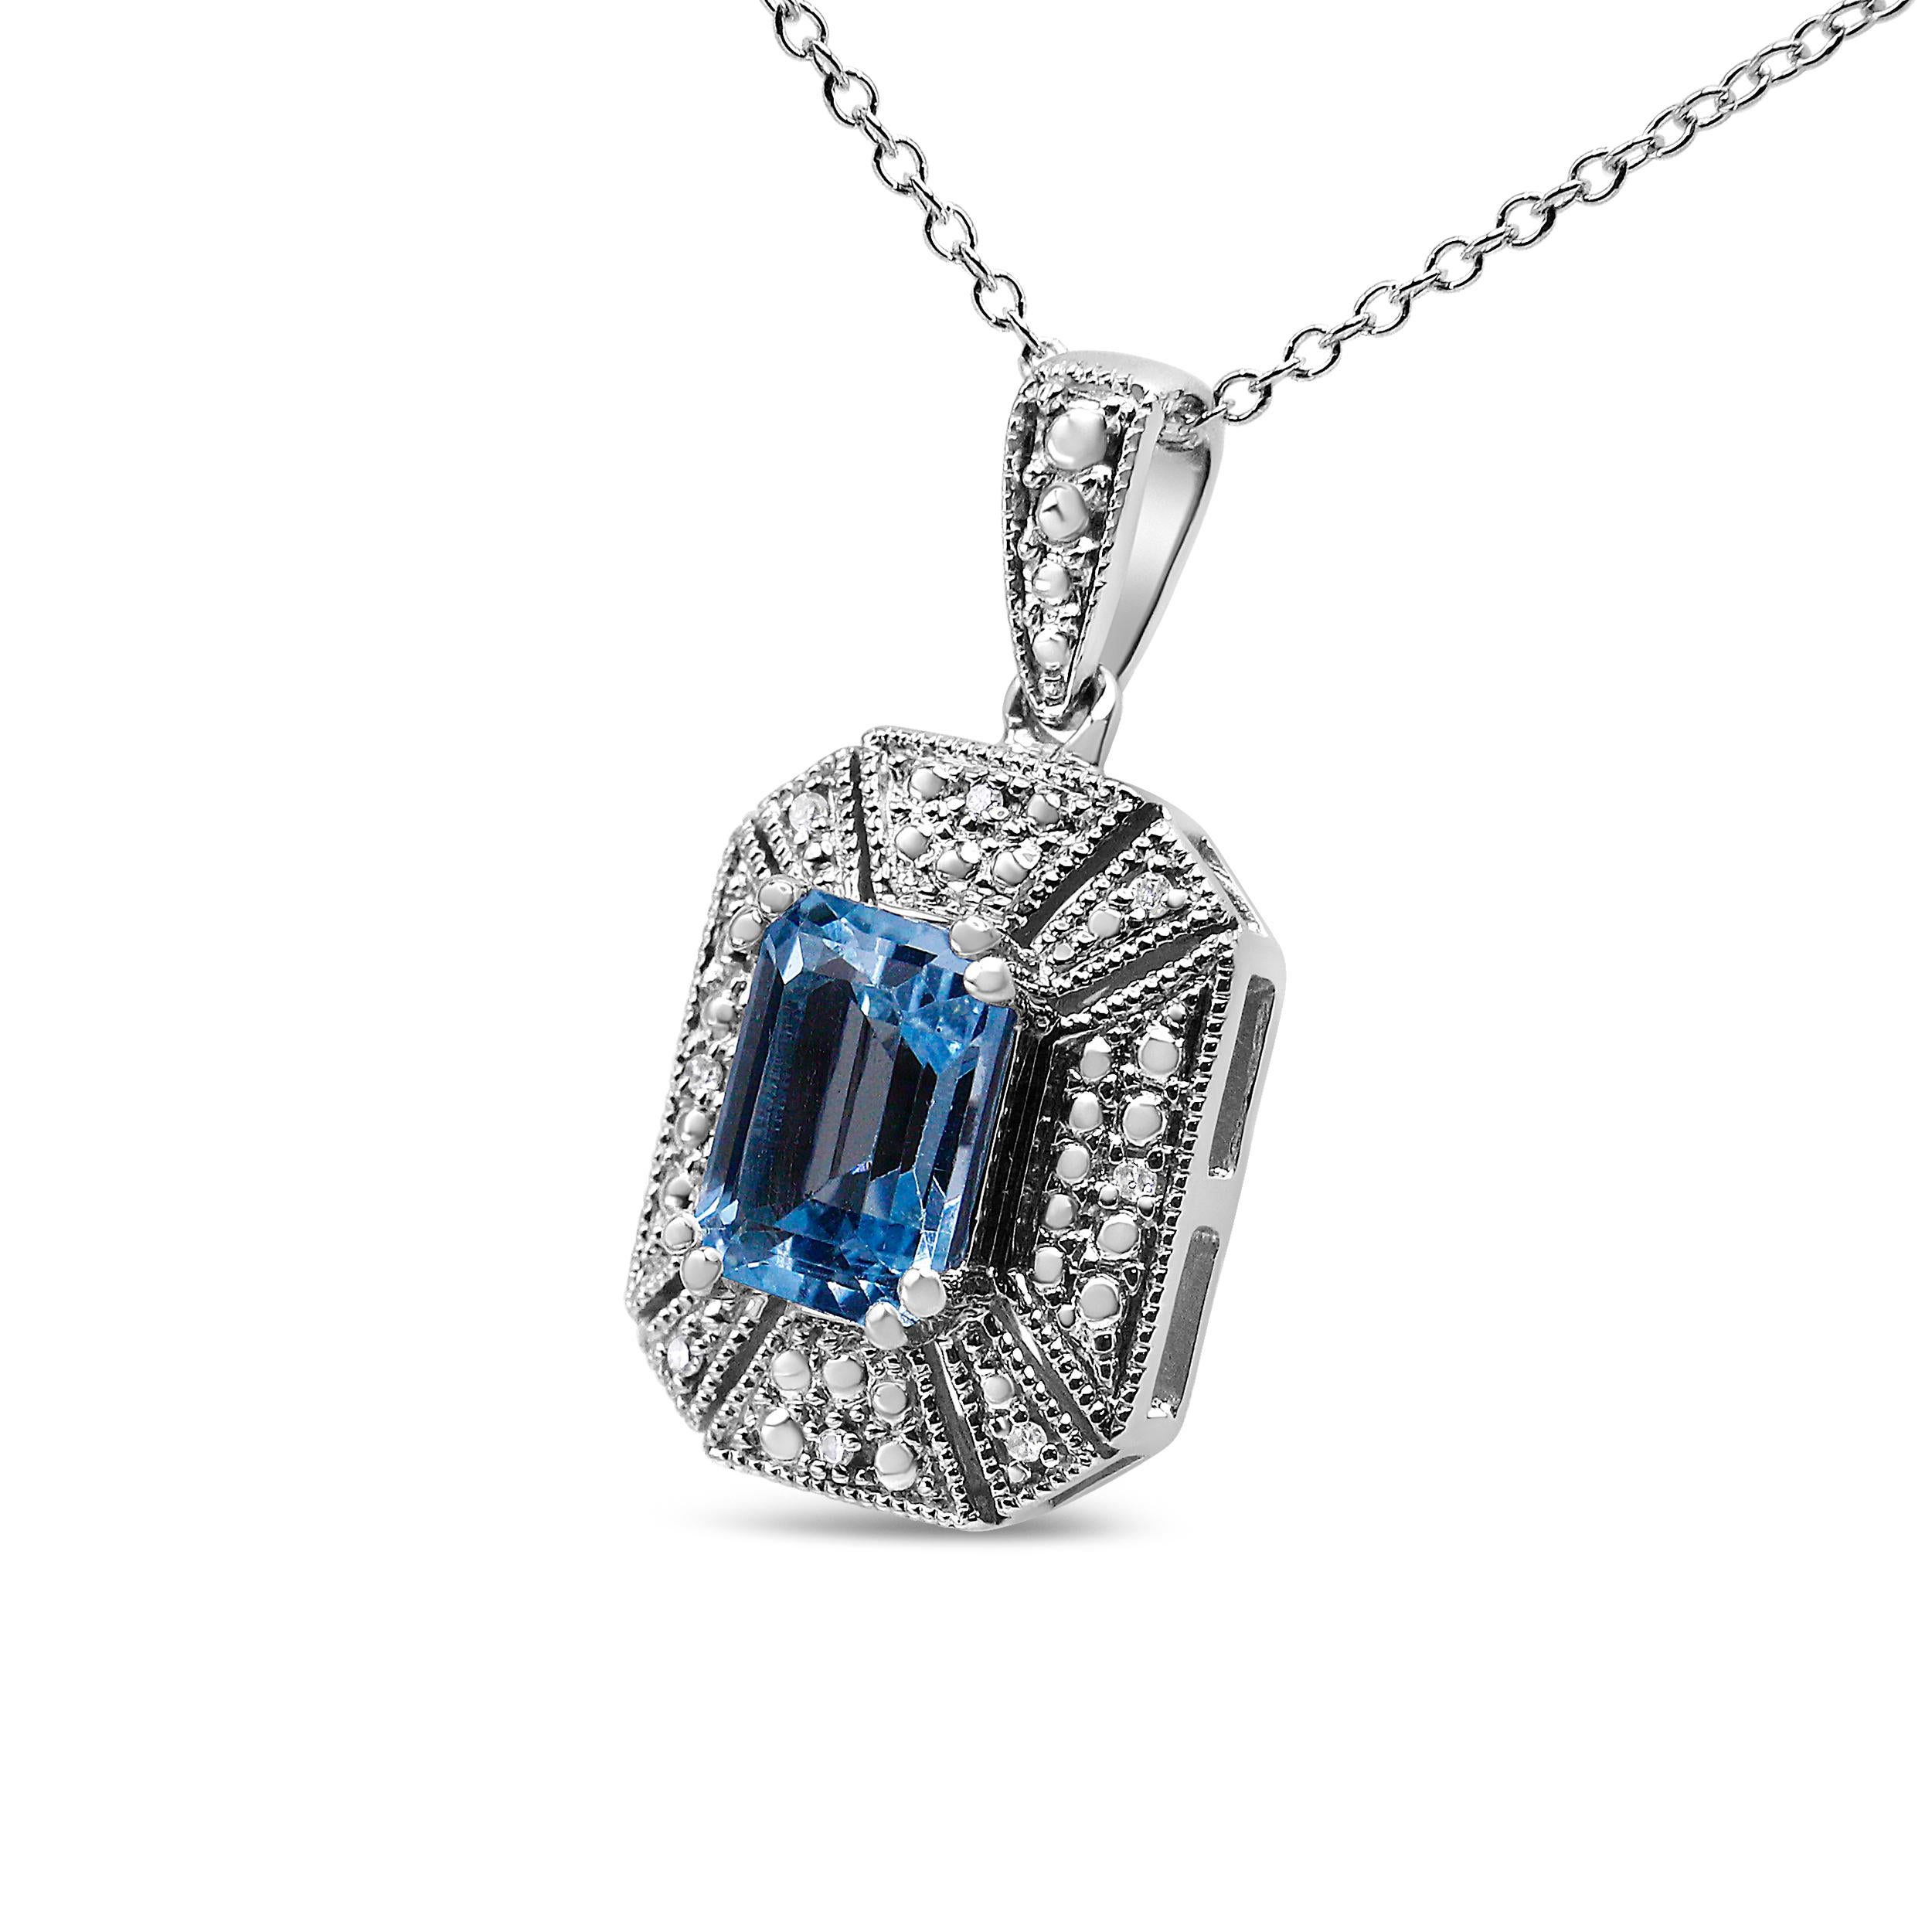 This Art Deco-inspired pendant necklace is made to make a statement. The .925 Sterling Silver necklace features an intricate design in an alluring emerald shape, accented with a rich 8x6mm emerald-cut natural blue Topaz gemstone that adds that pop